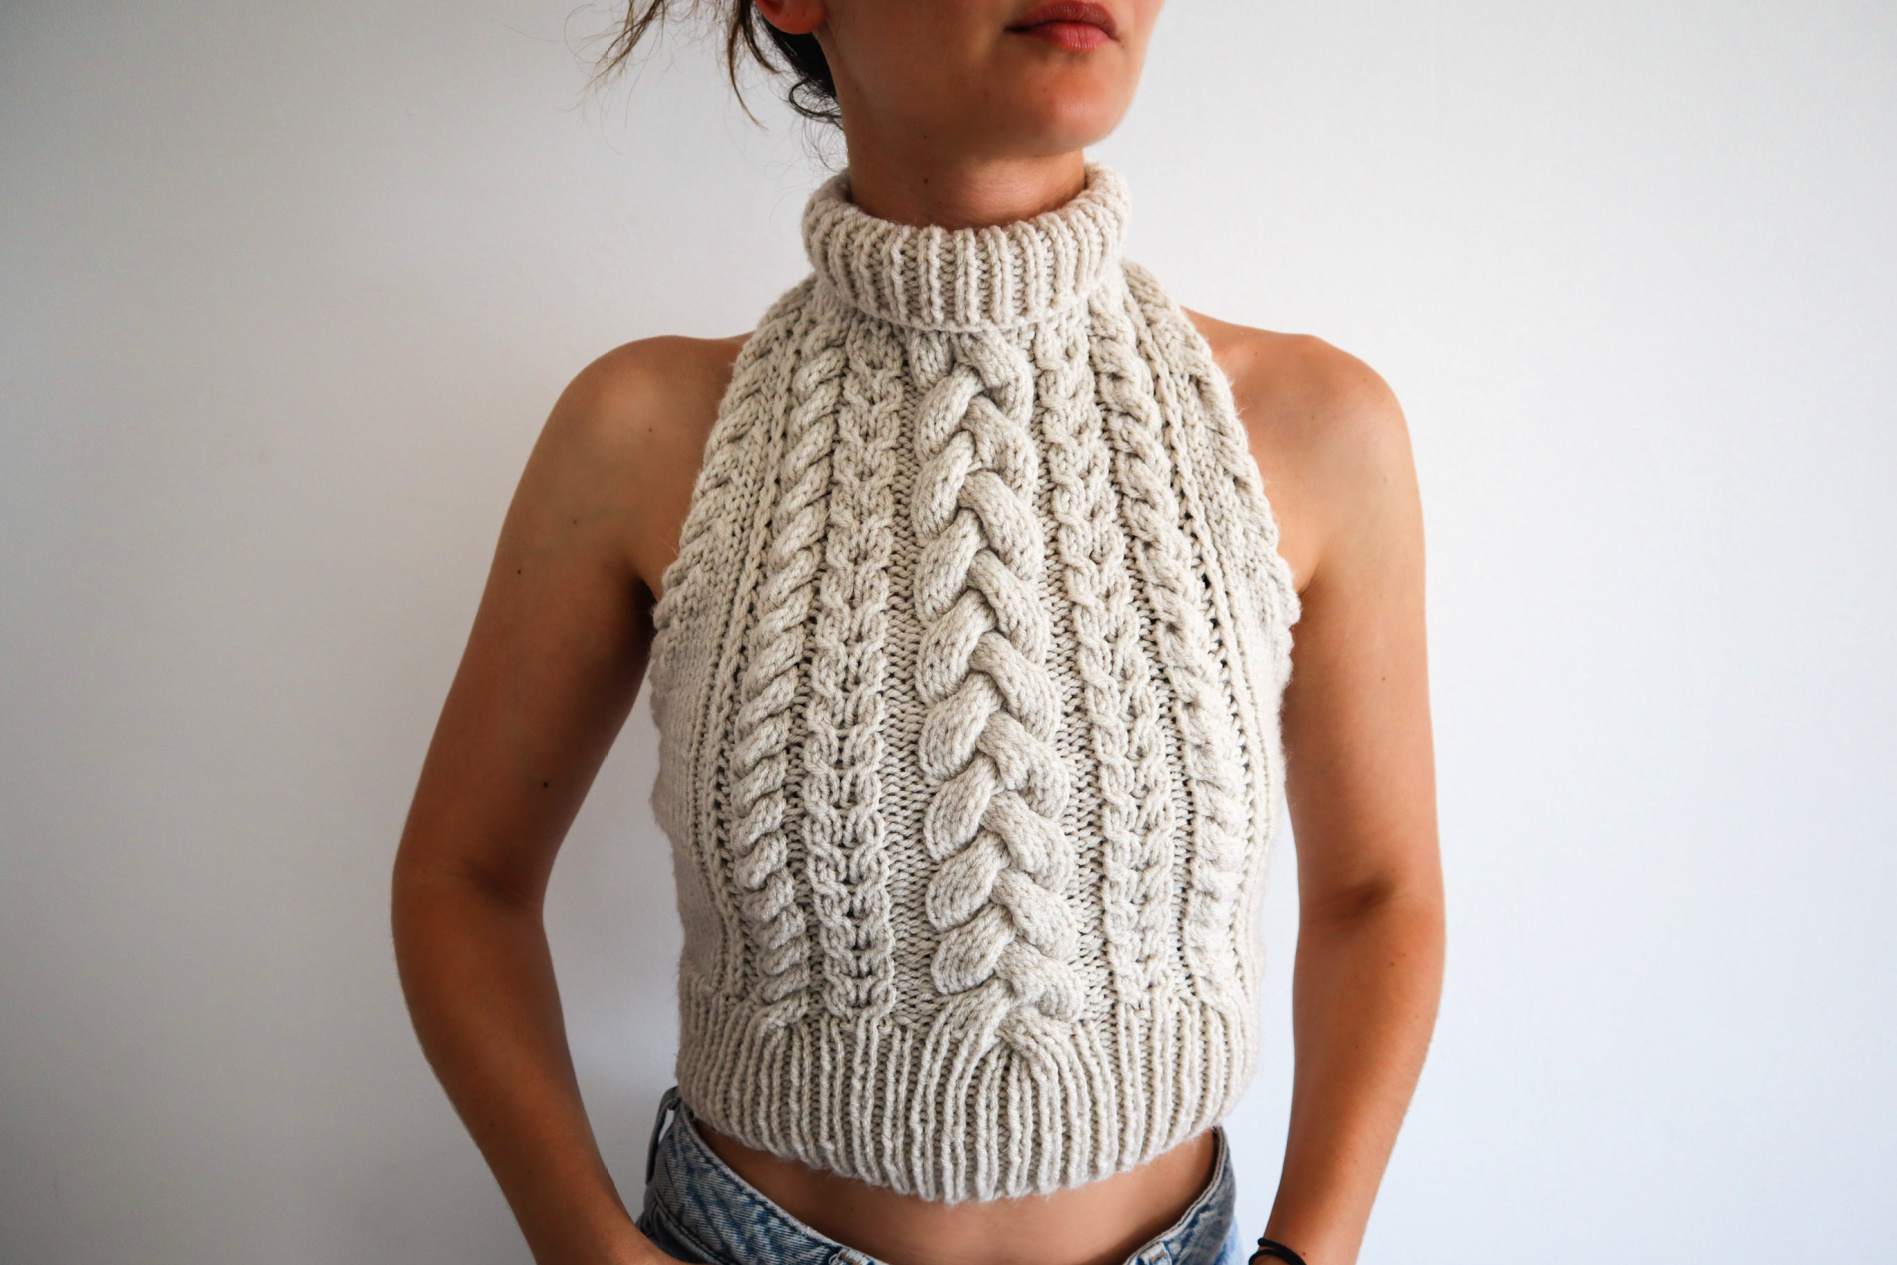 Copious Cables – Cable Knit Halter Top Pattern – The Snugglery